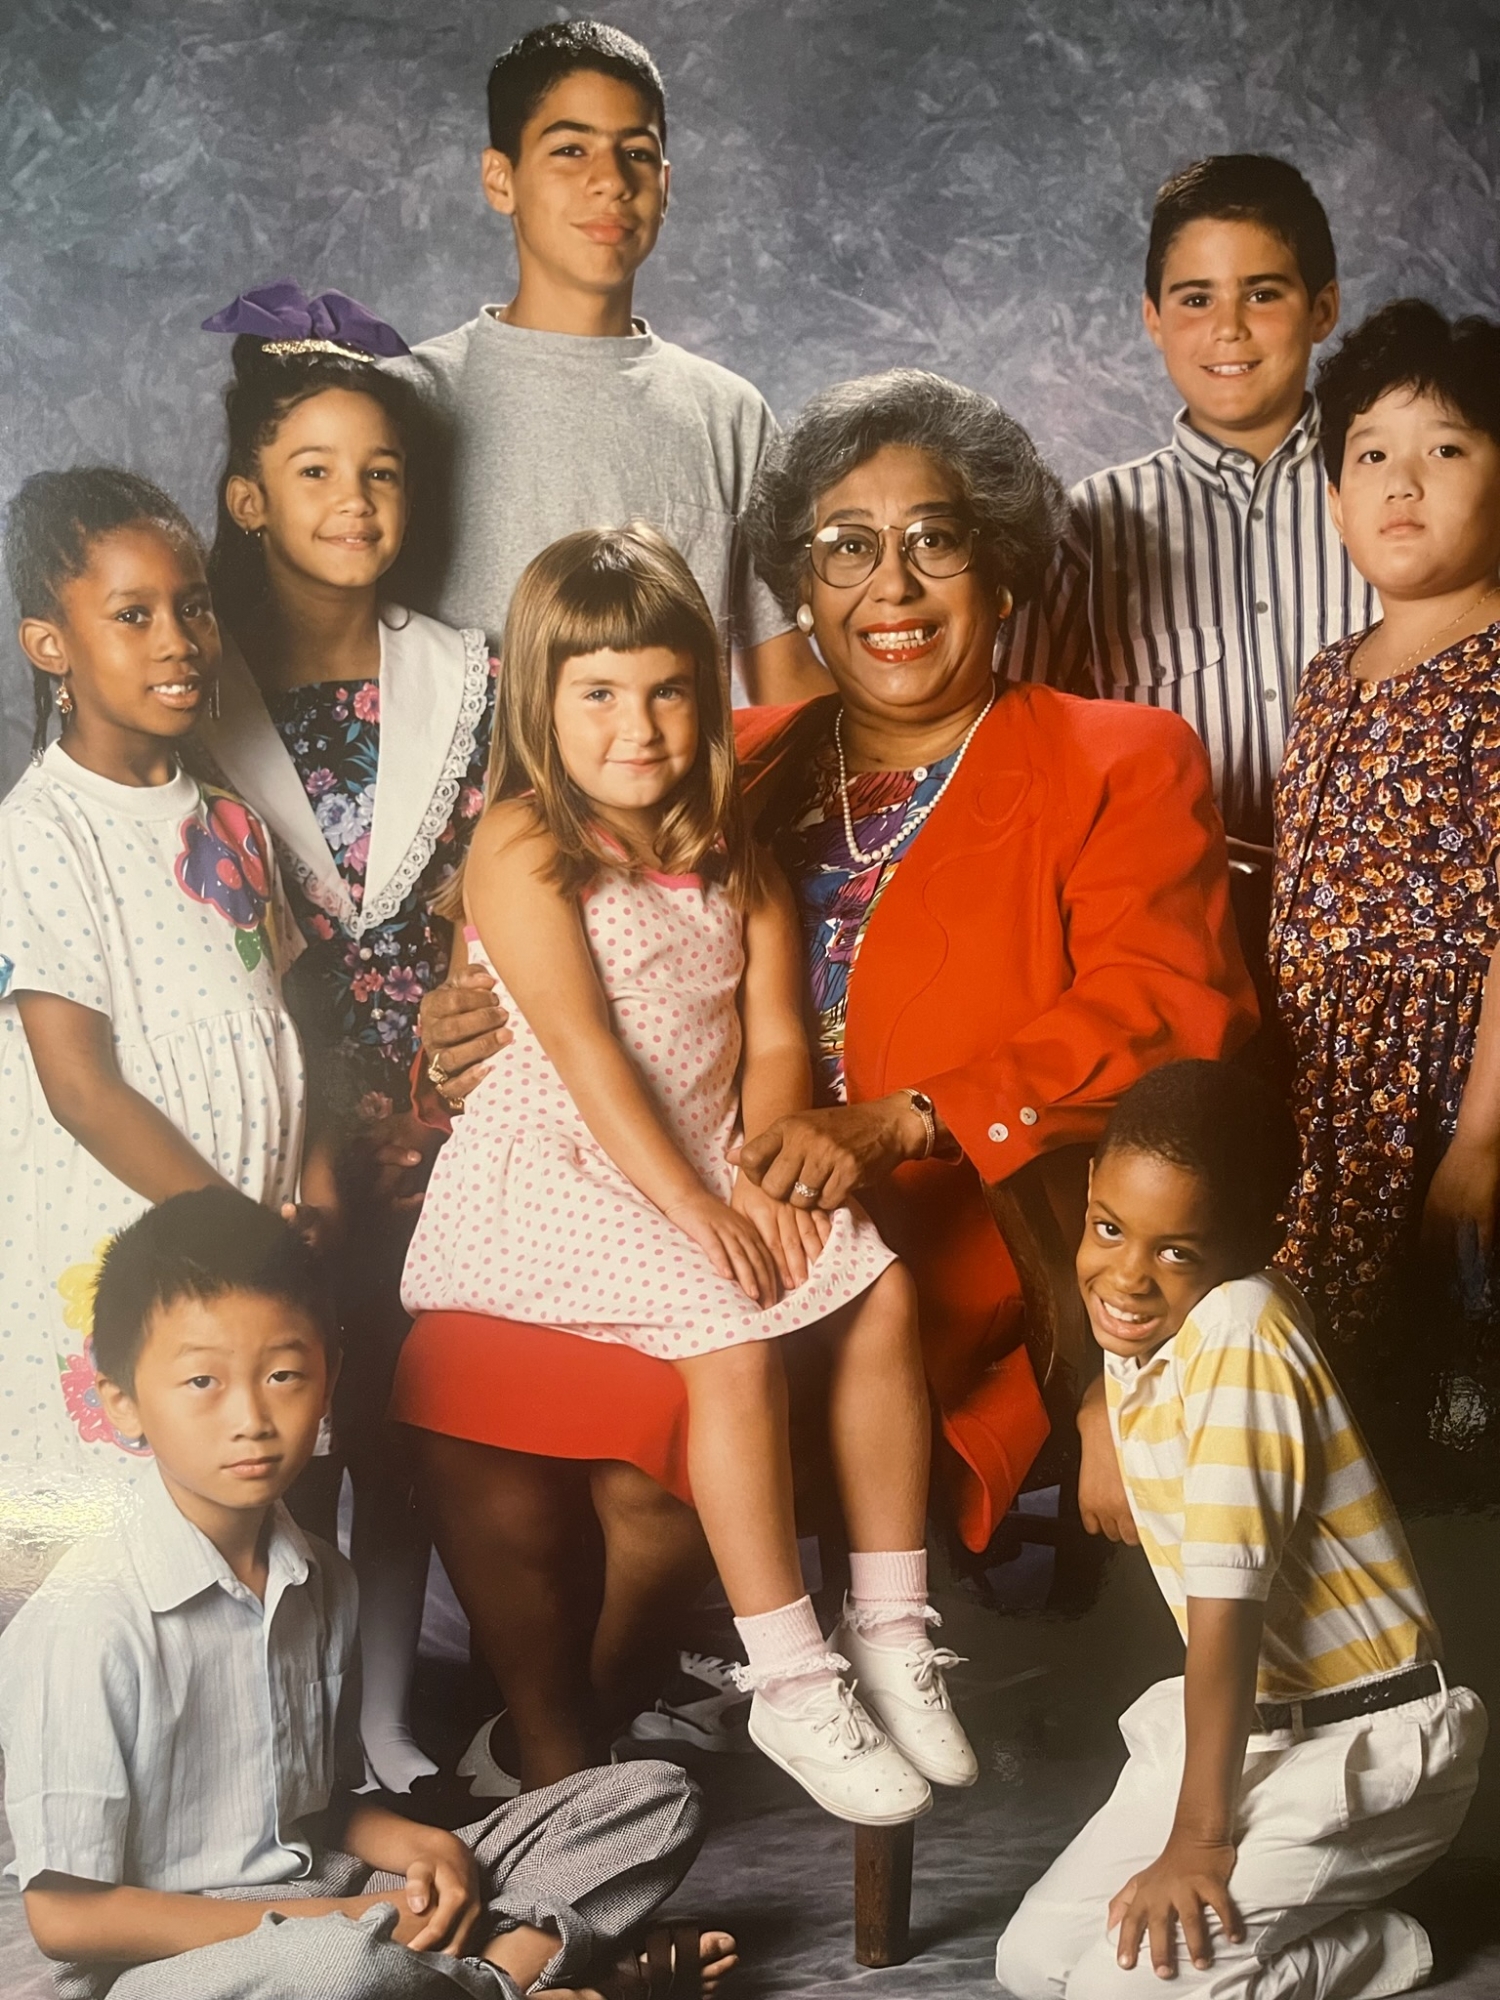 Dr. Constance E. Clayton sits in a chair wearing a red skirt and blazer over a floral shirt, surrounded by a multiracial group of children from the Philadelphia School District, during her term as Philadelphia